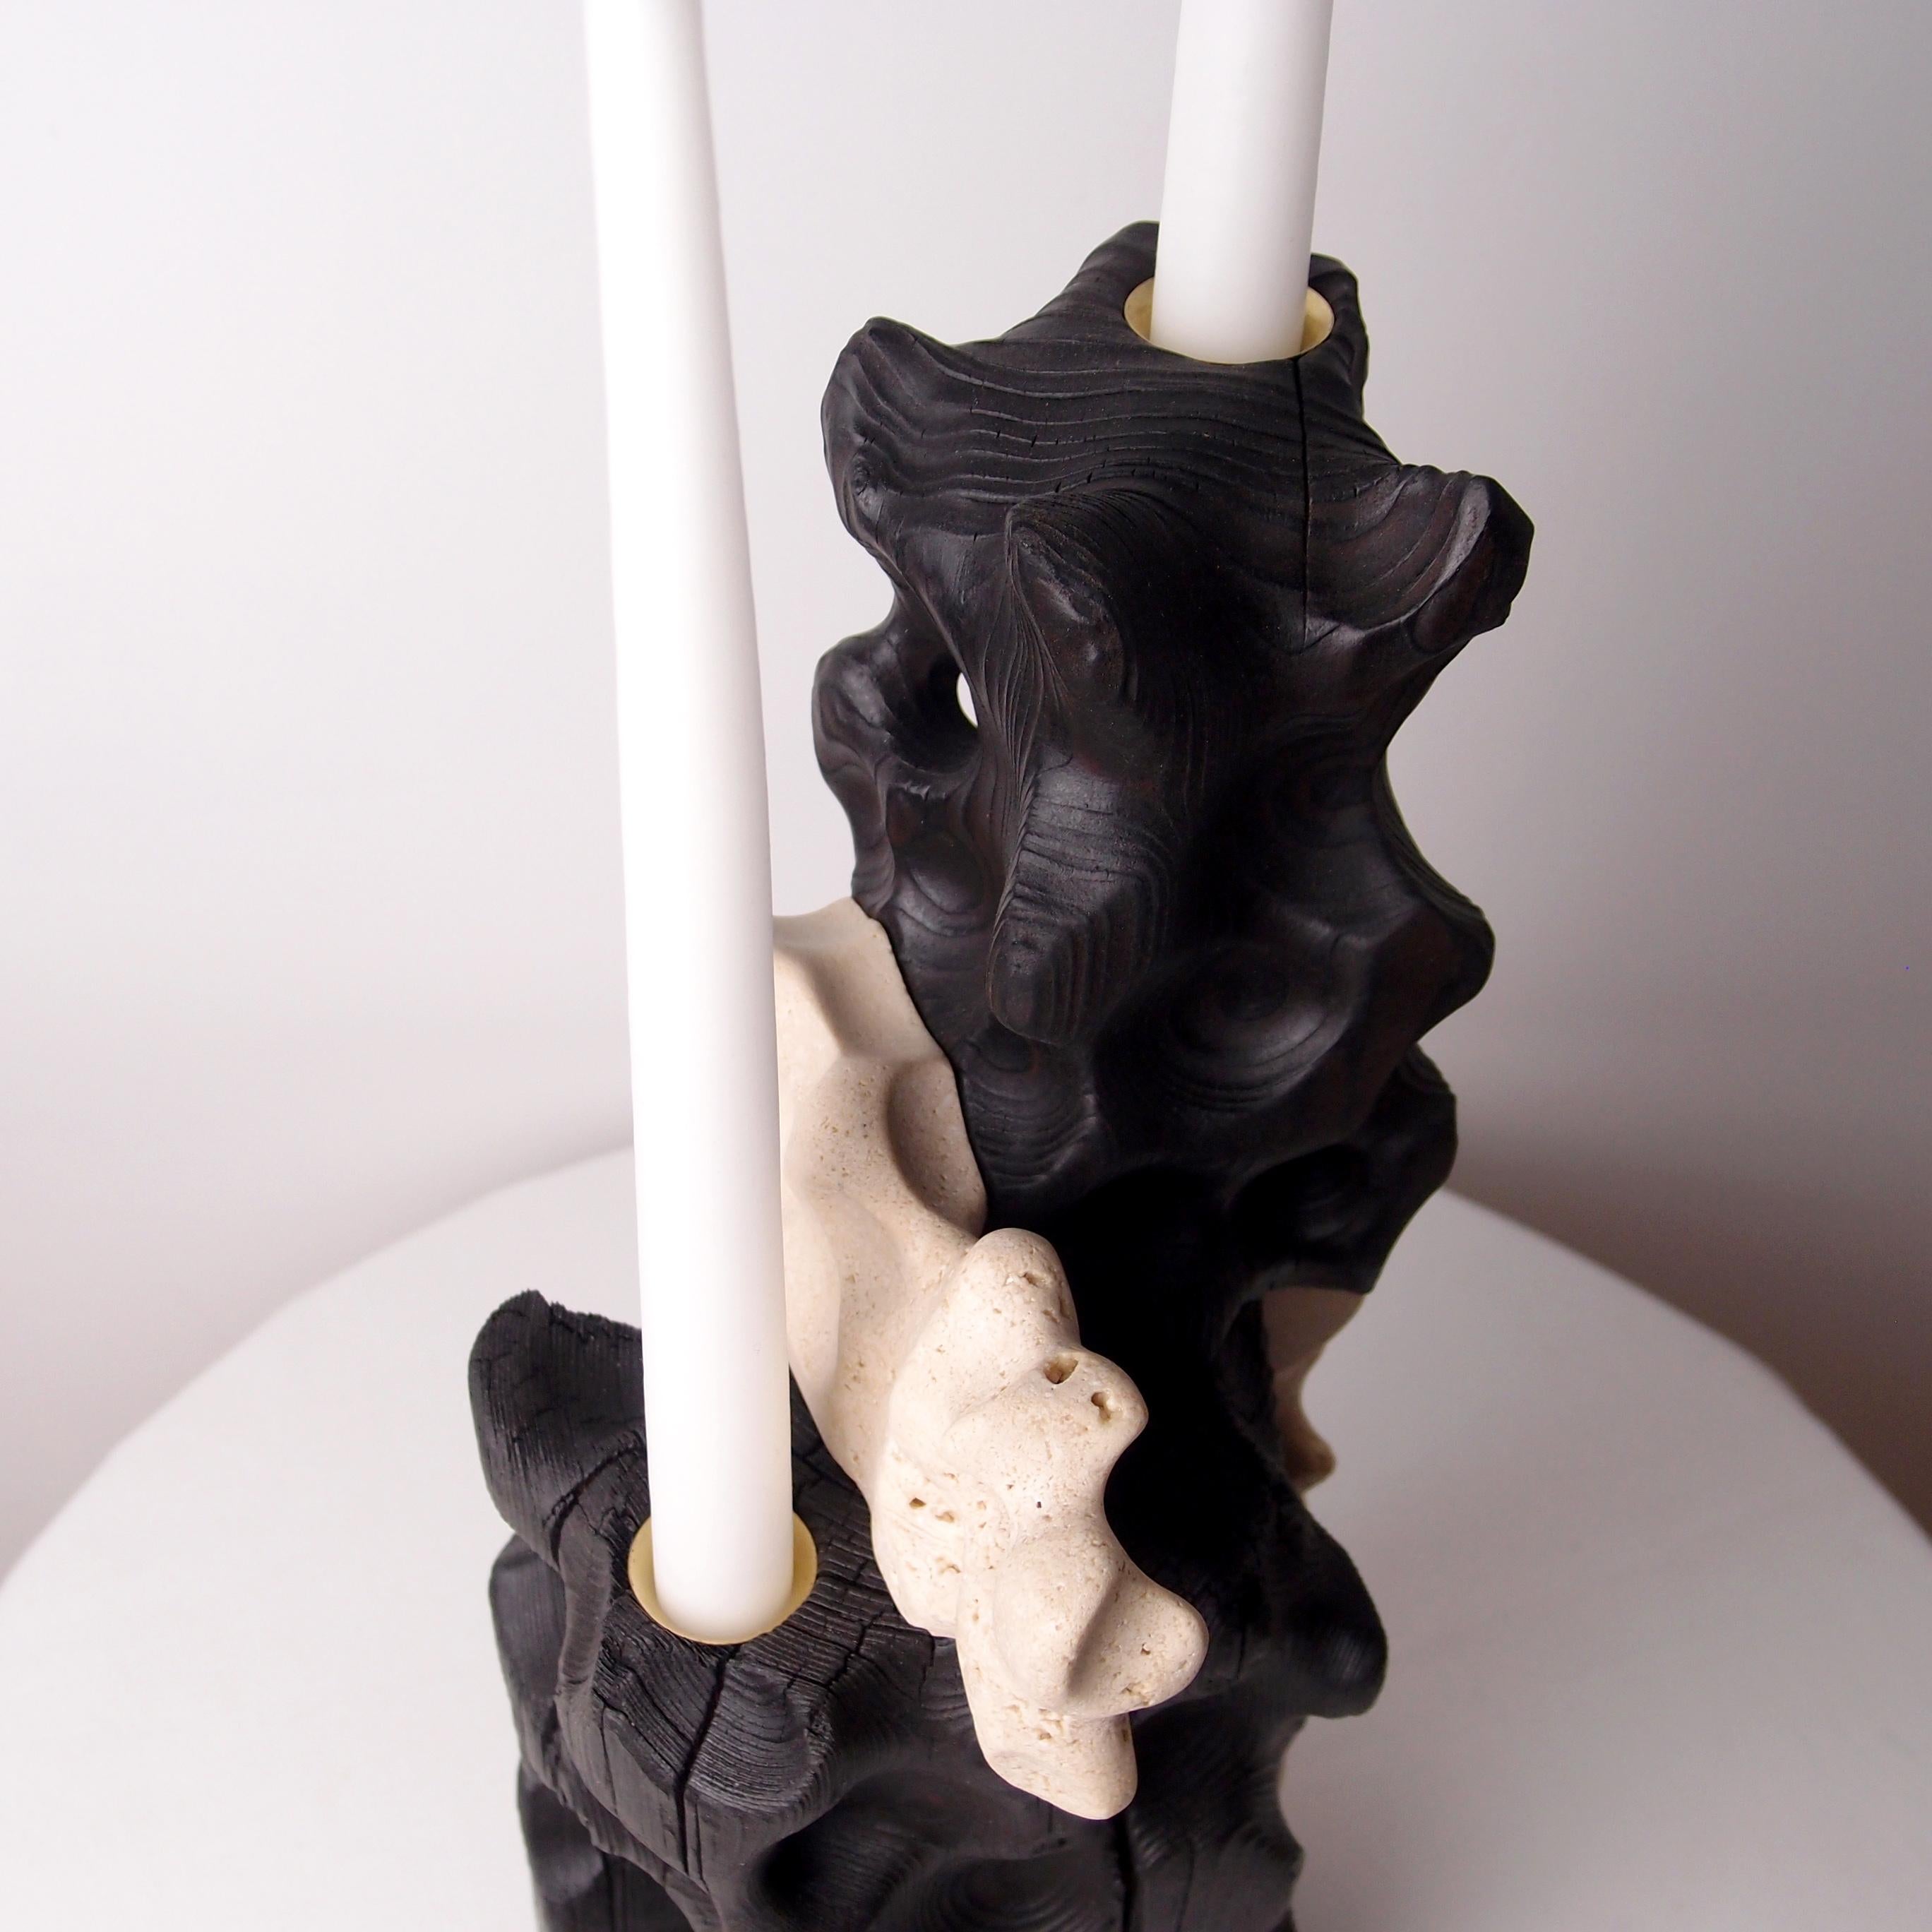 Holey Tower, Sculptured Candle Holder from Reclaimed Burned Wood and Limestone For Sale 2